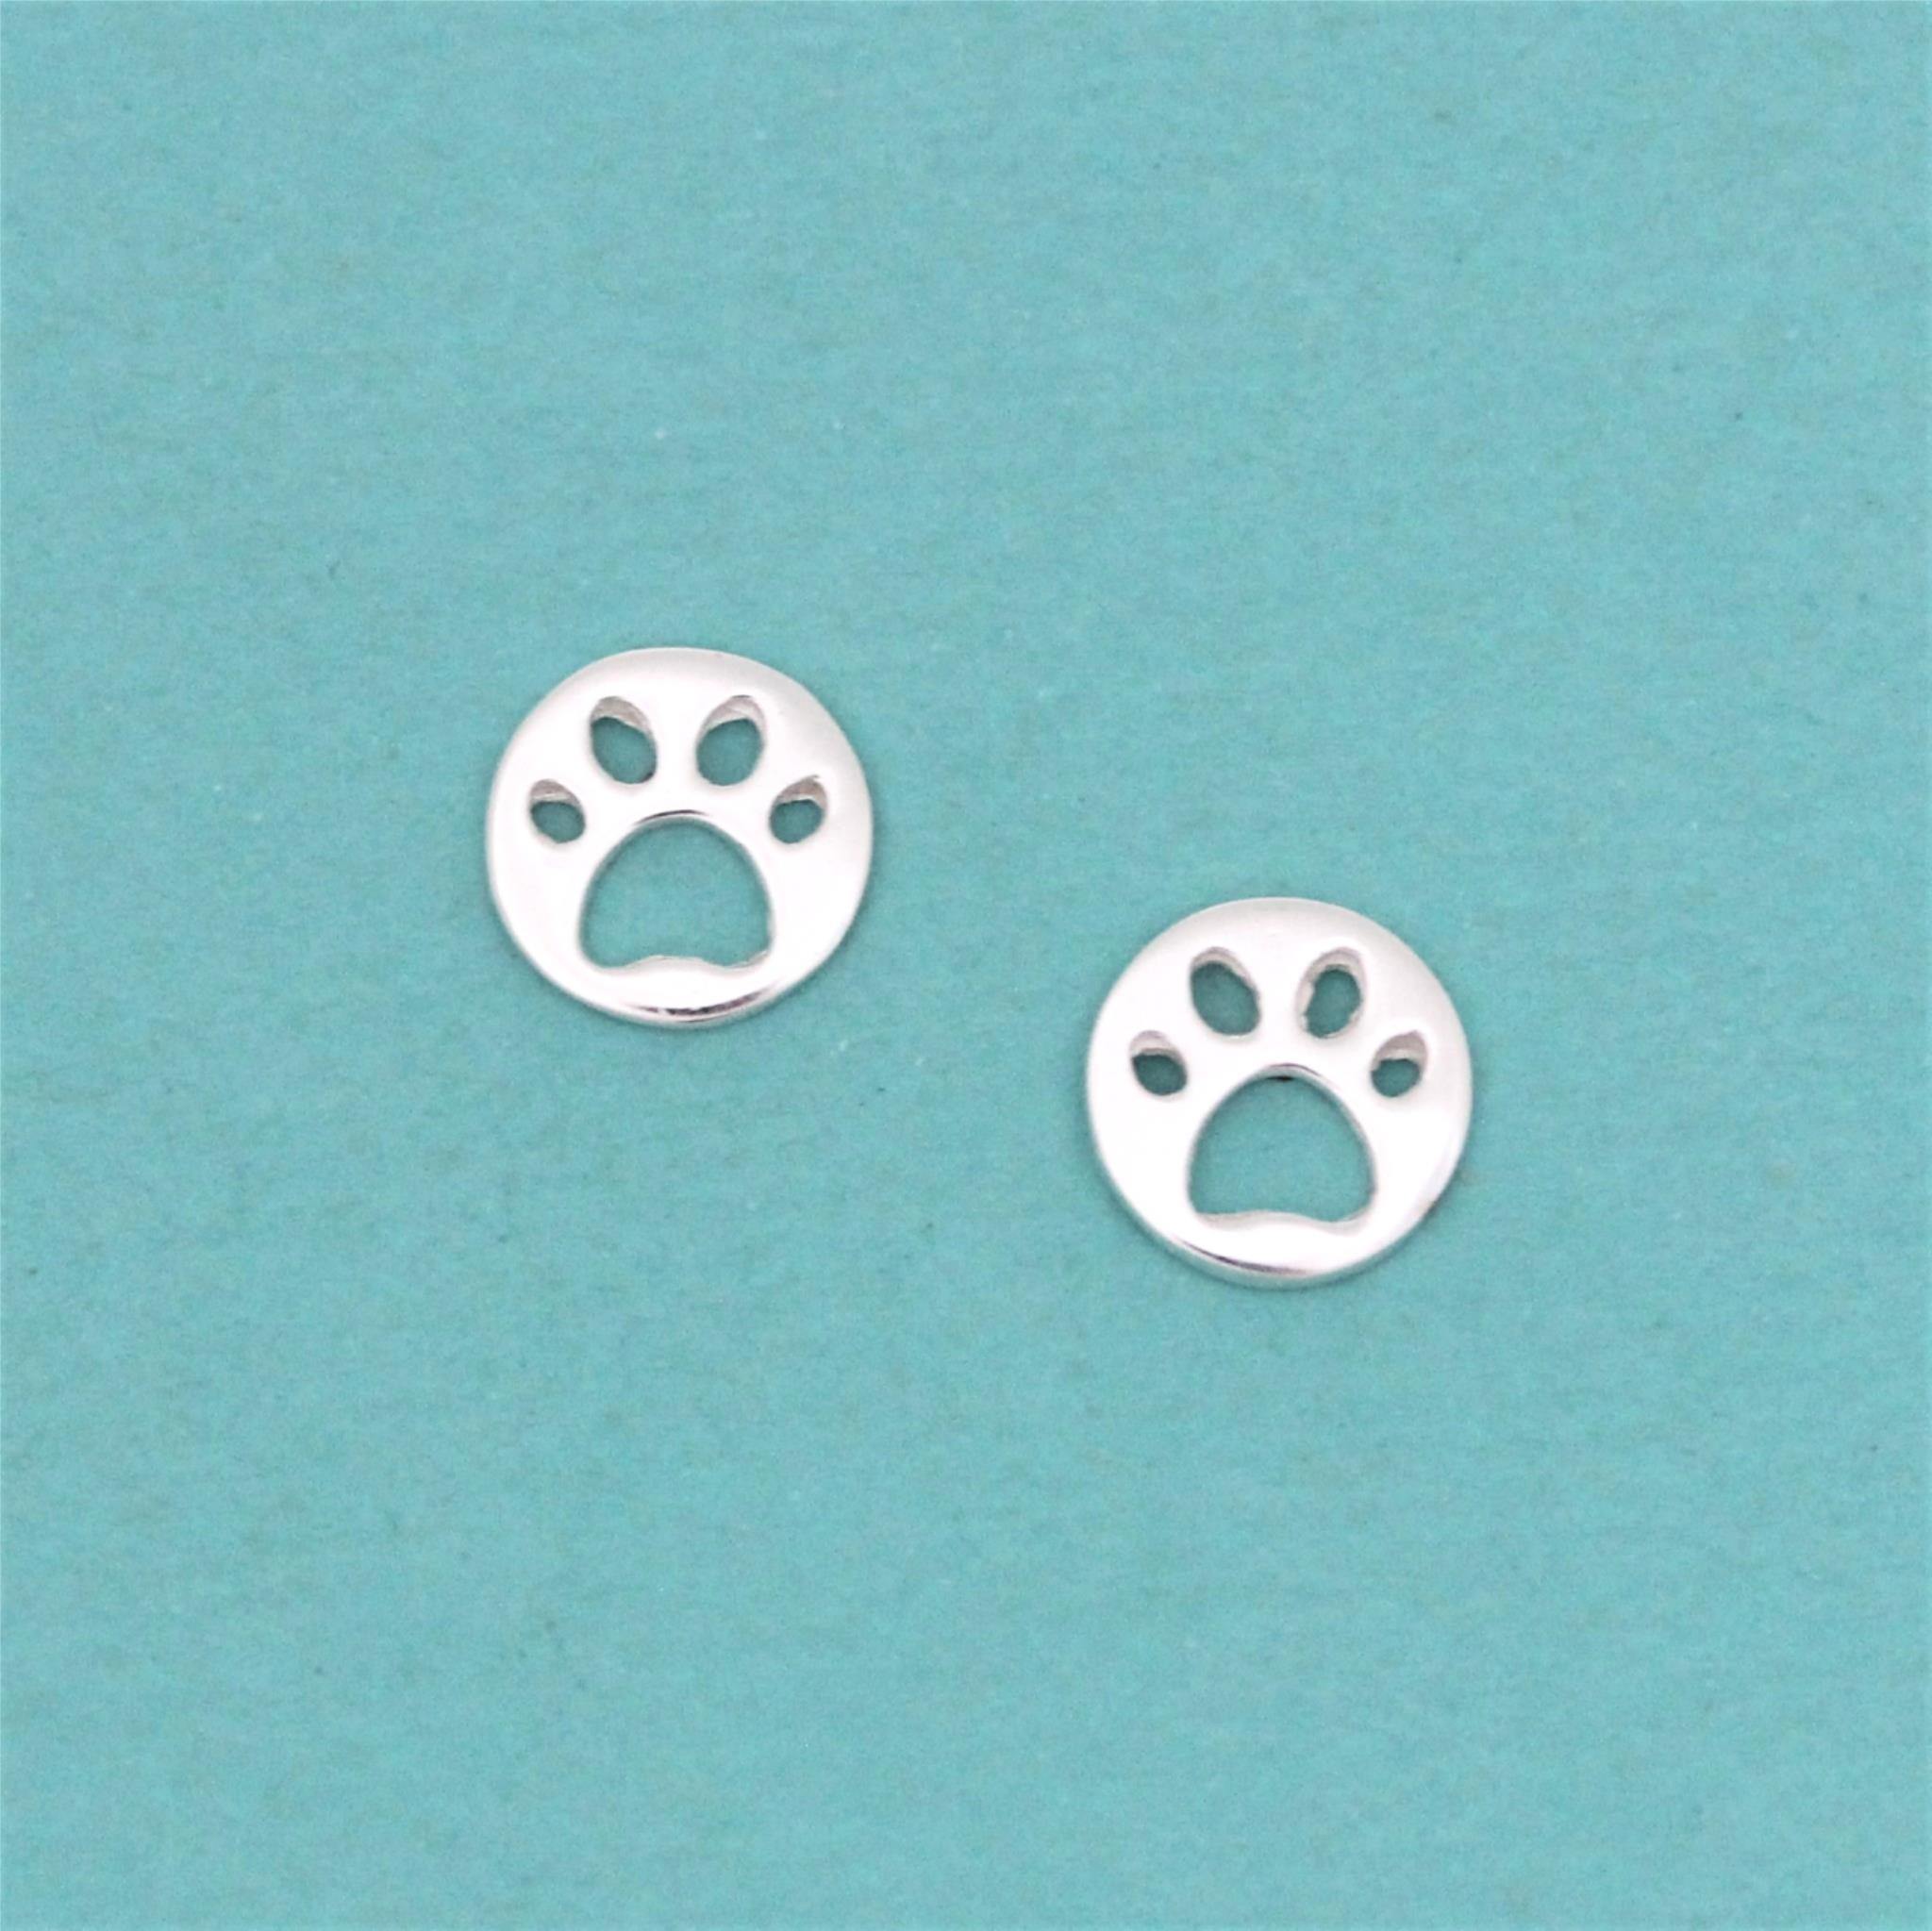 Sterling Silver 8mm Cut Out Dog Paw Stud Animal Earrings Ladies Kids - STERLING SILVER DESIGNS